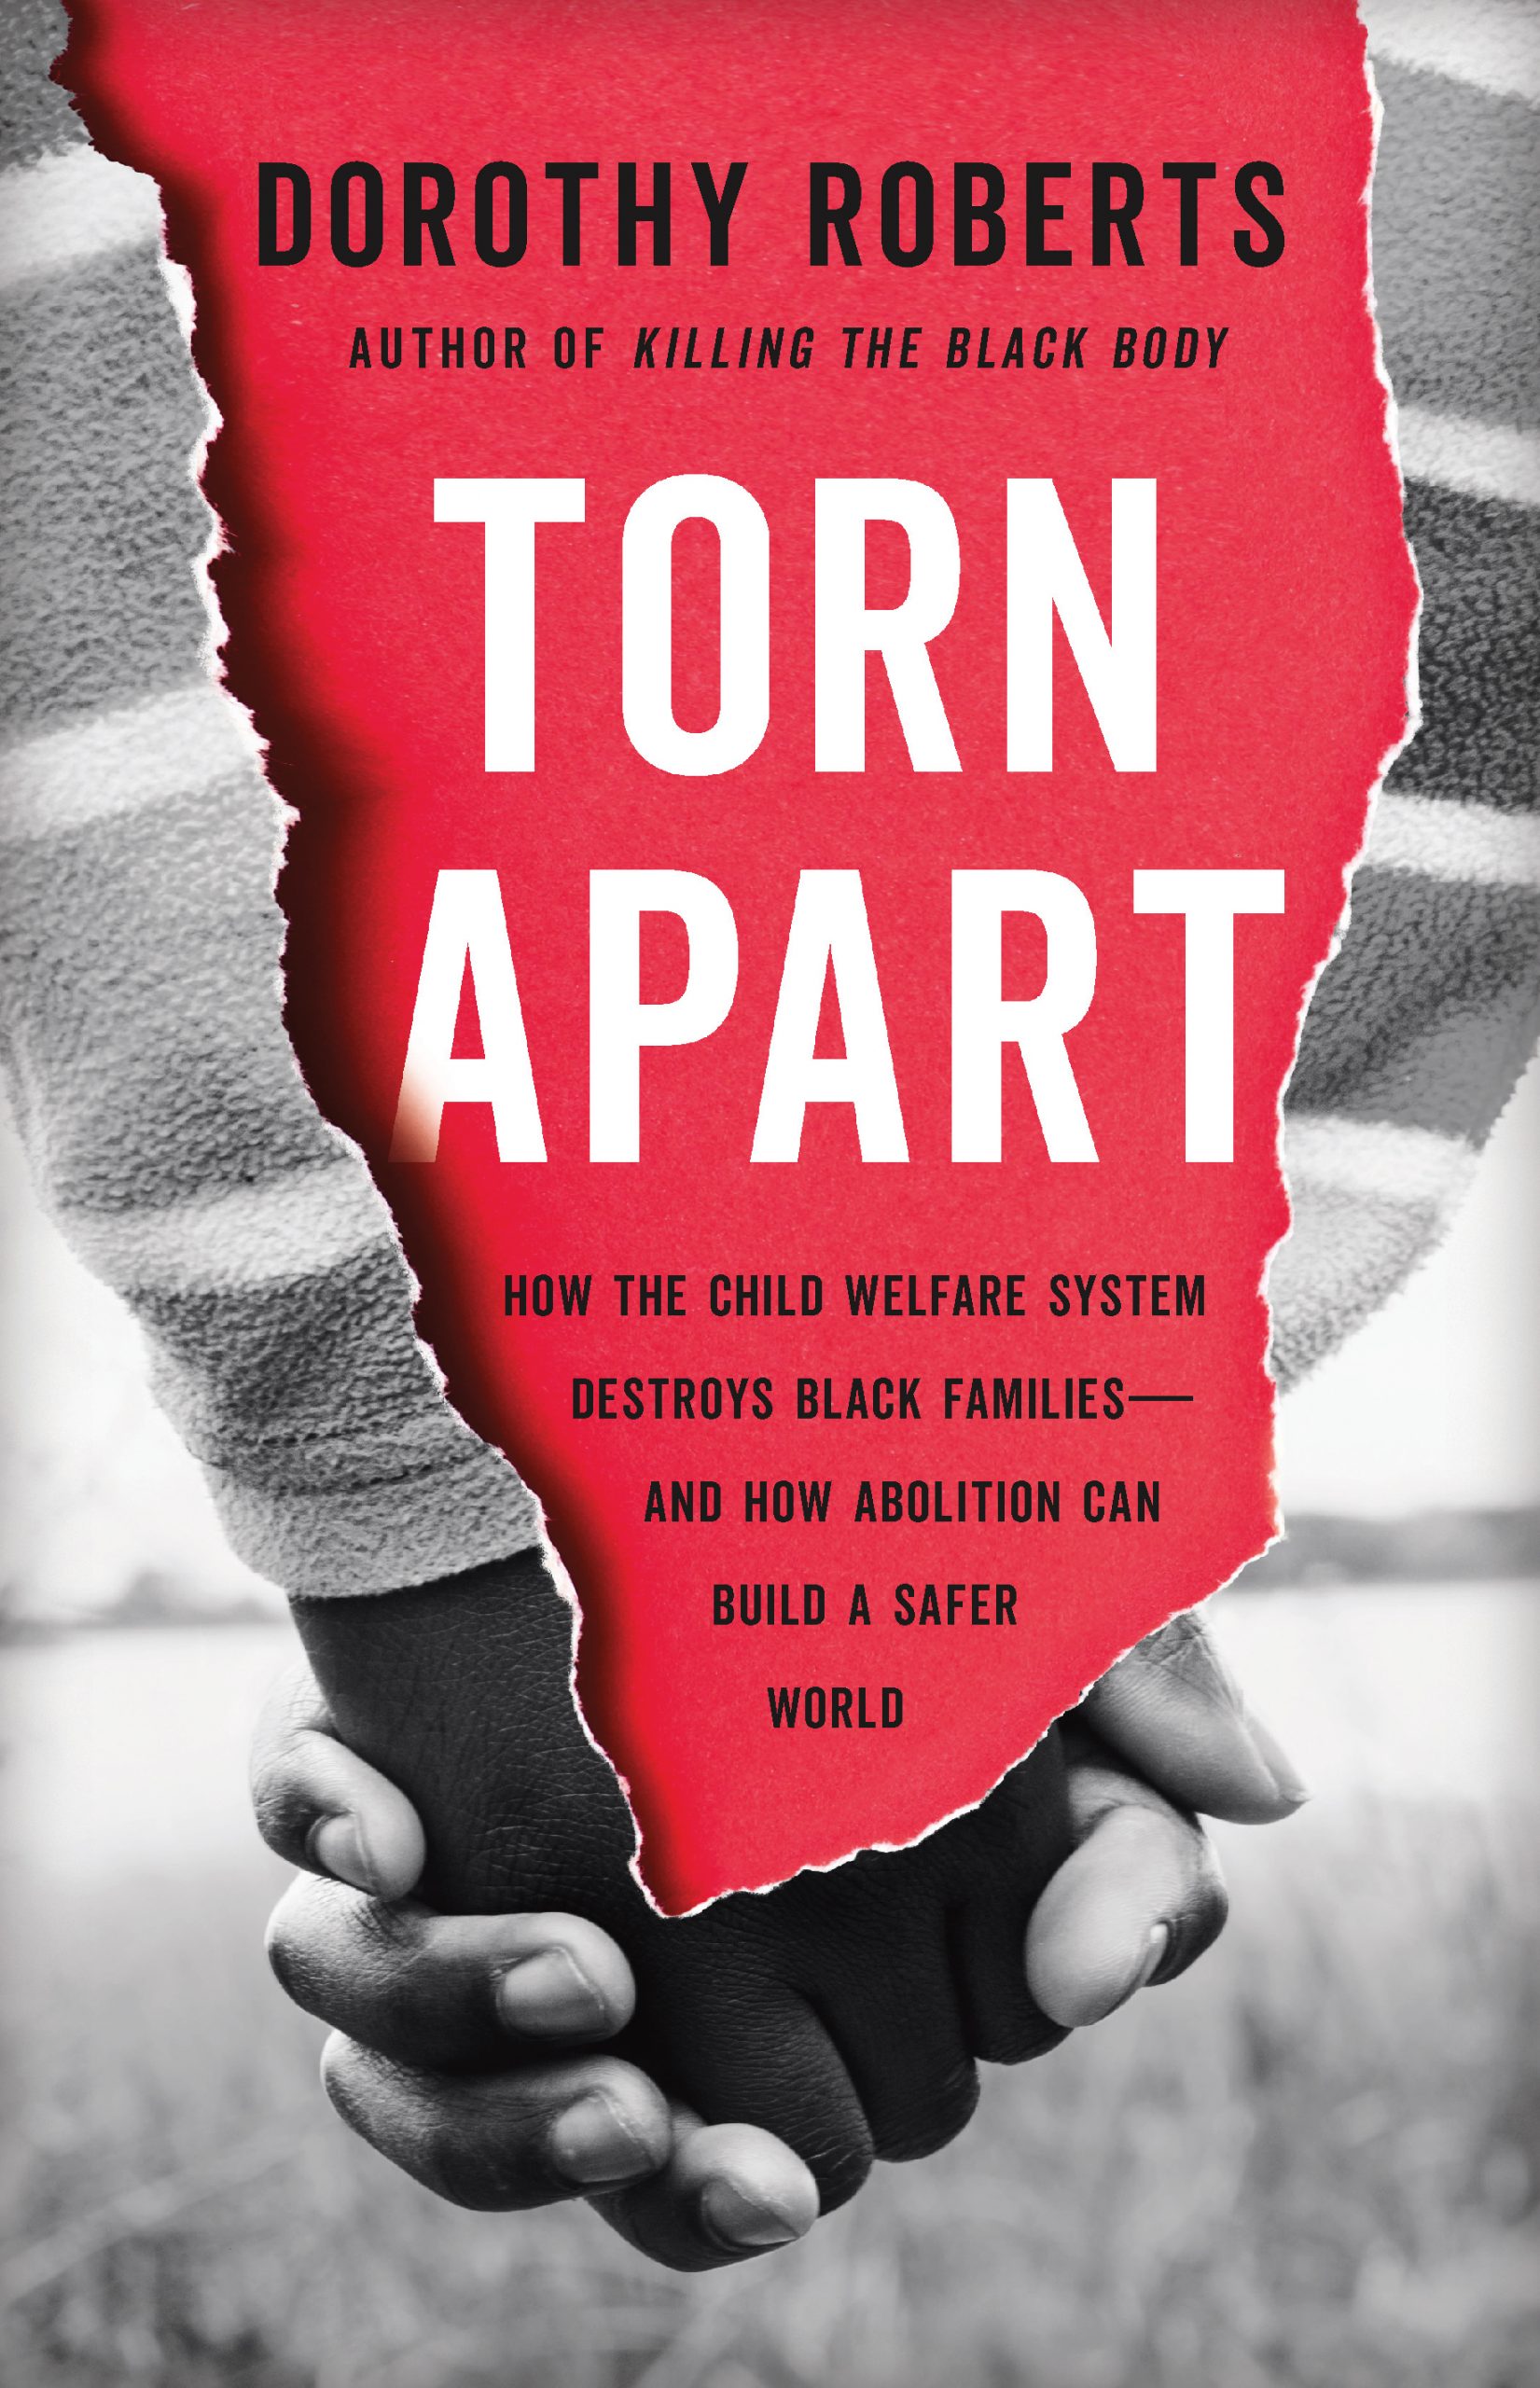 Book cover of Dorothy Roberts' Torn Apart.